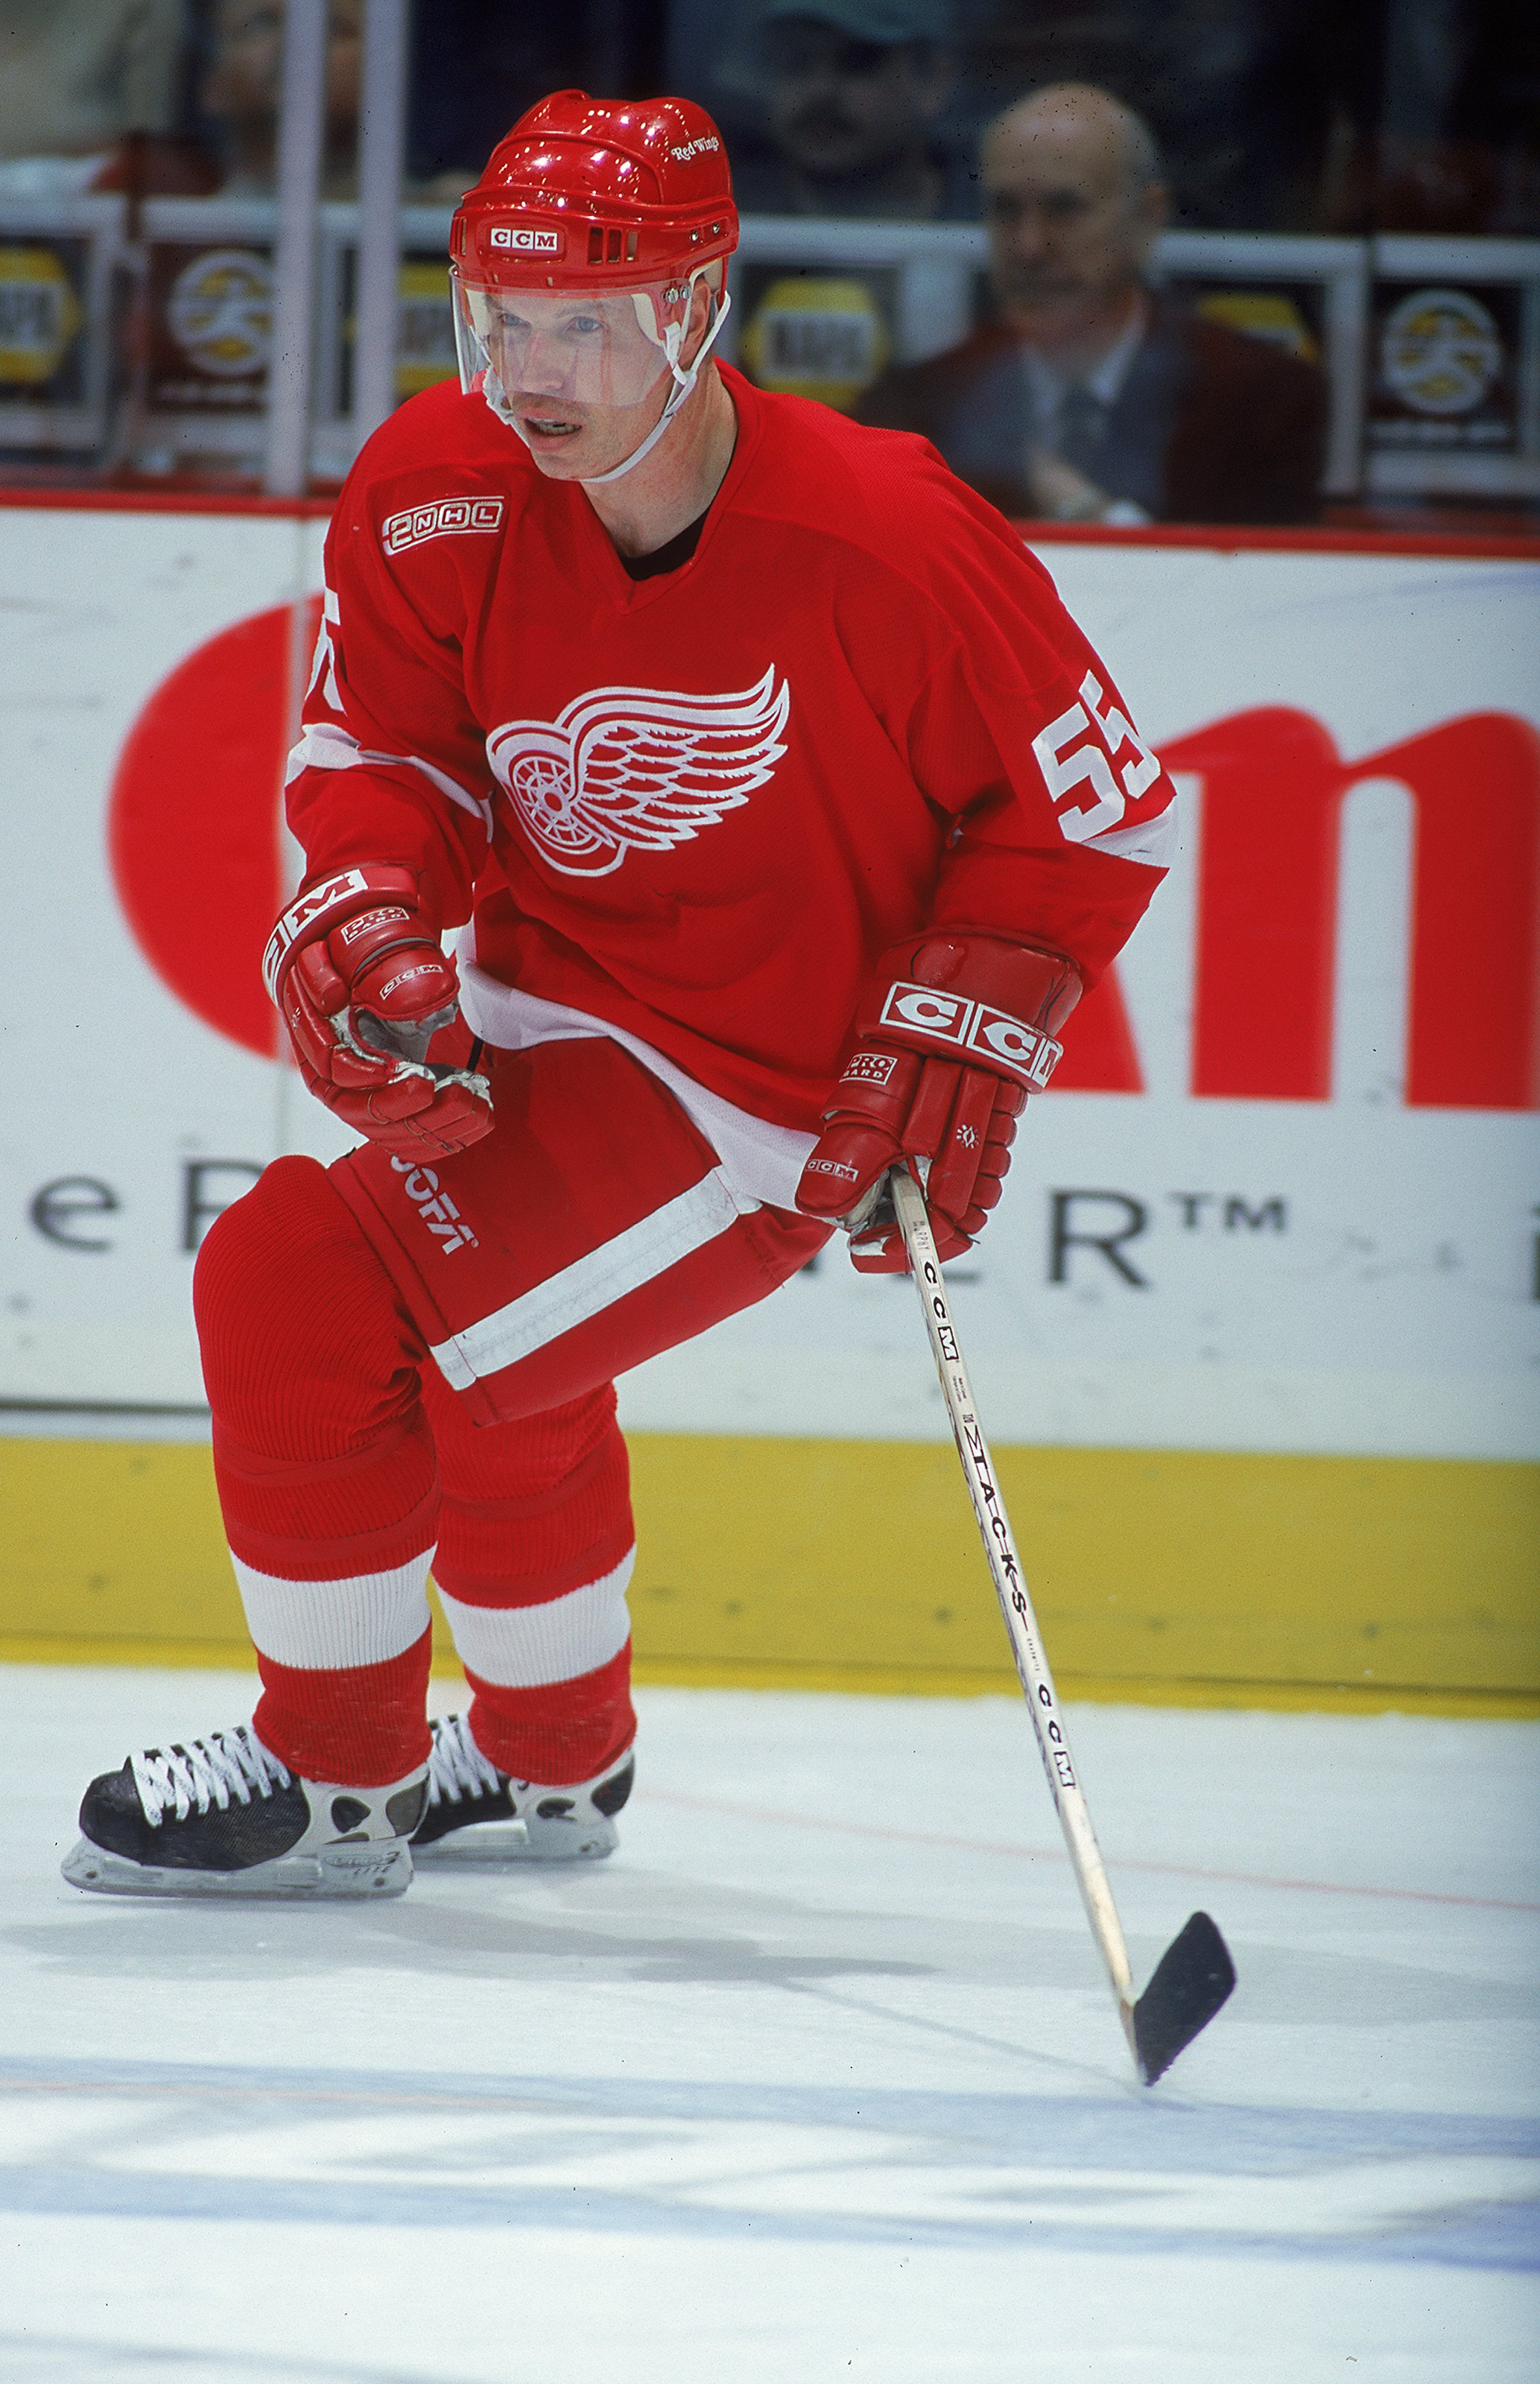 5 Trades the Detroit Red Wings Never Should Have Made